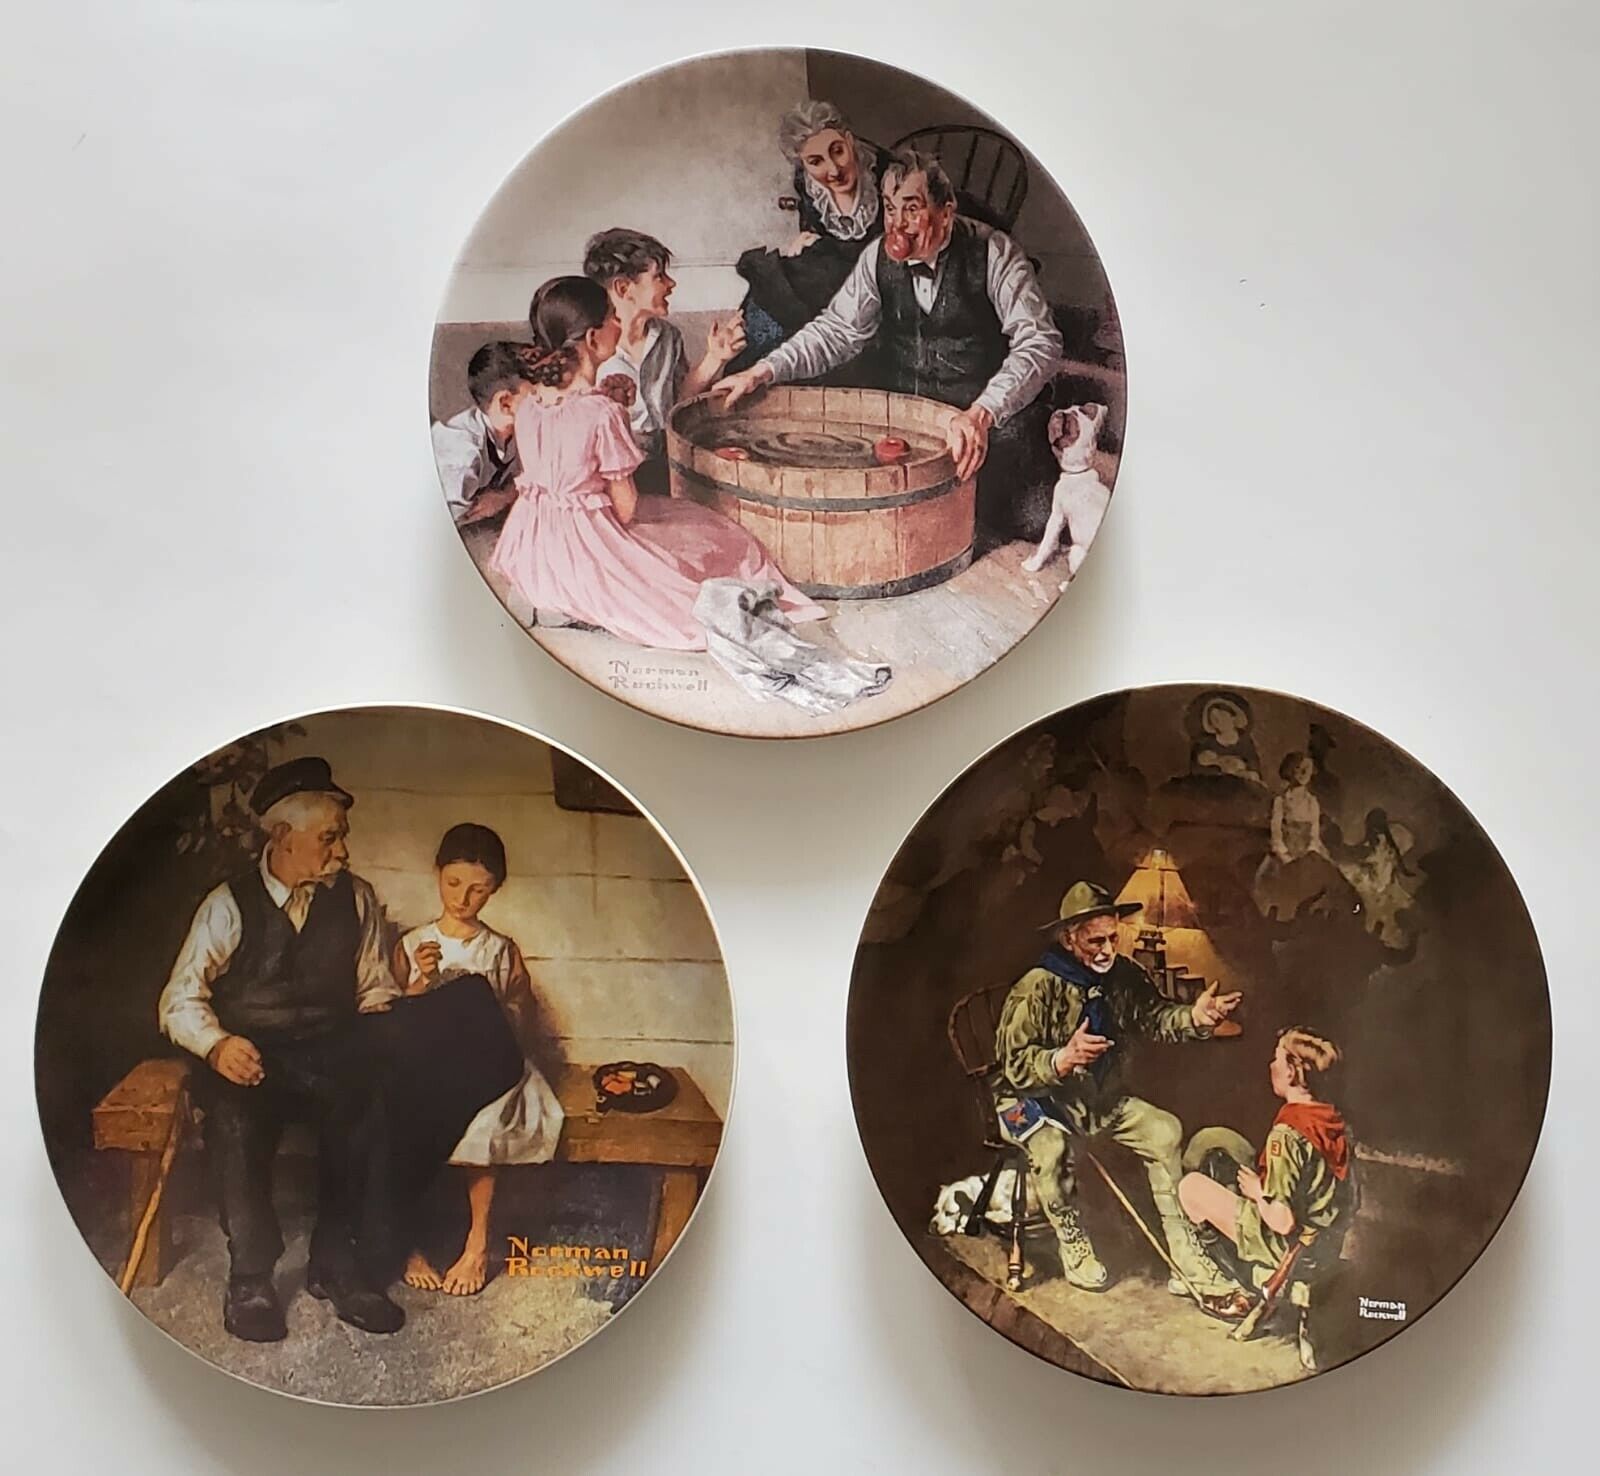 Vintage Plates Part of Rocwell Heritage by Norman Rockwell. P25,90